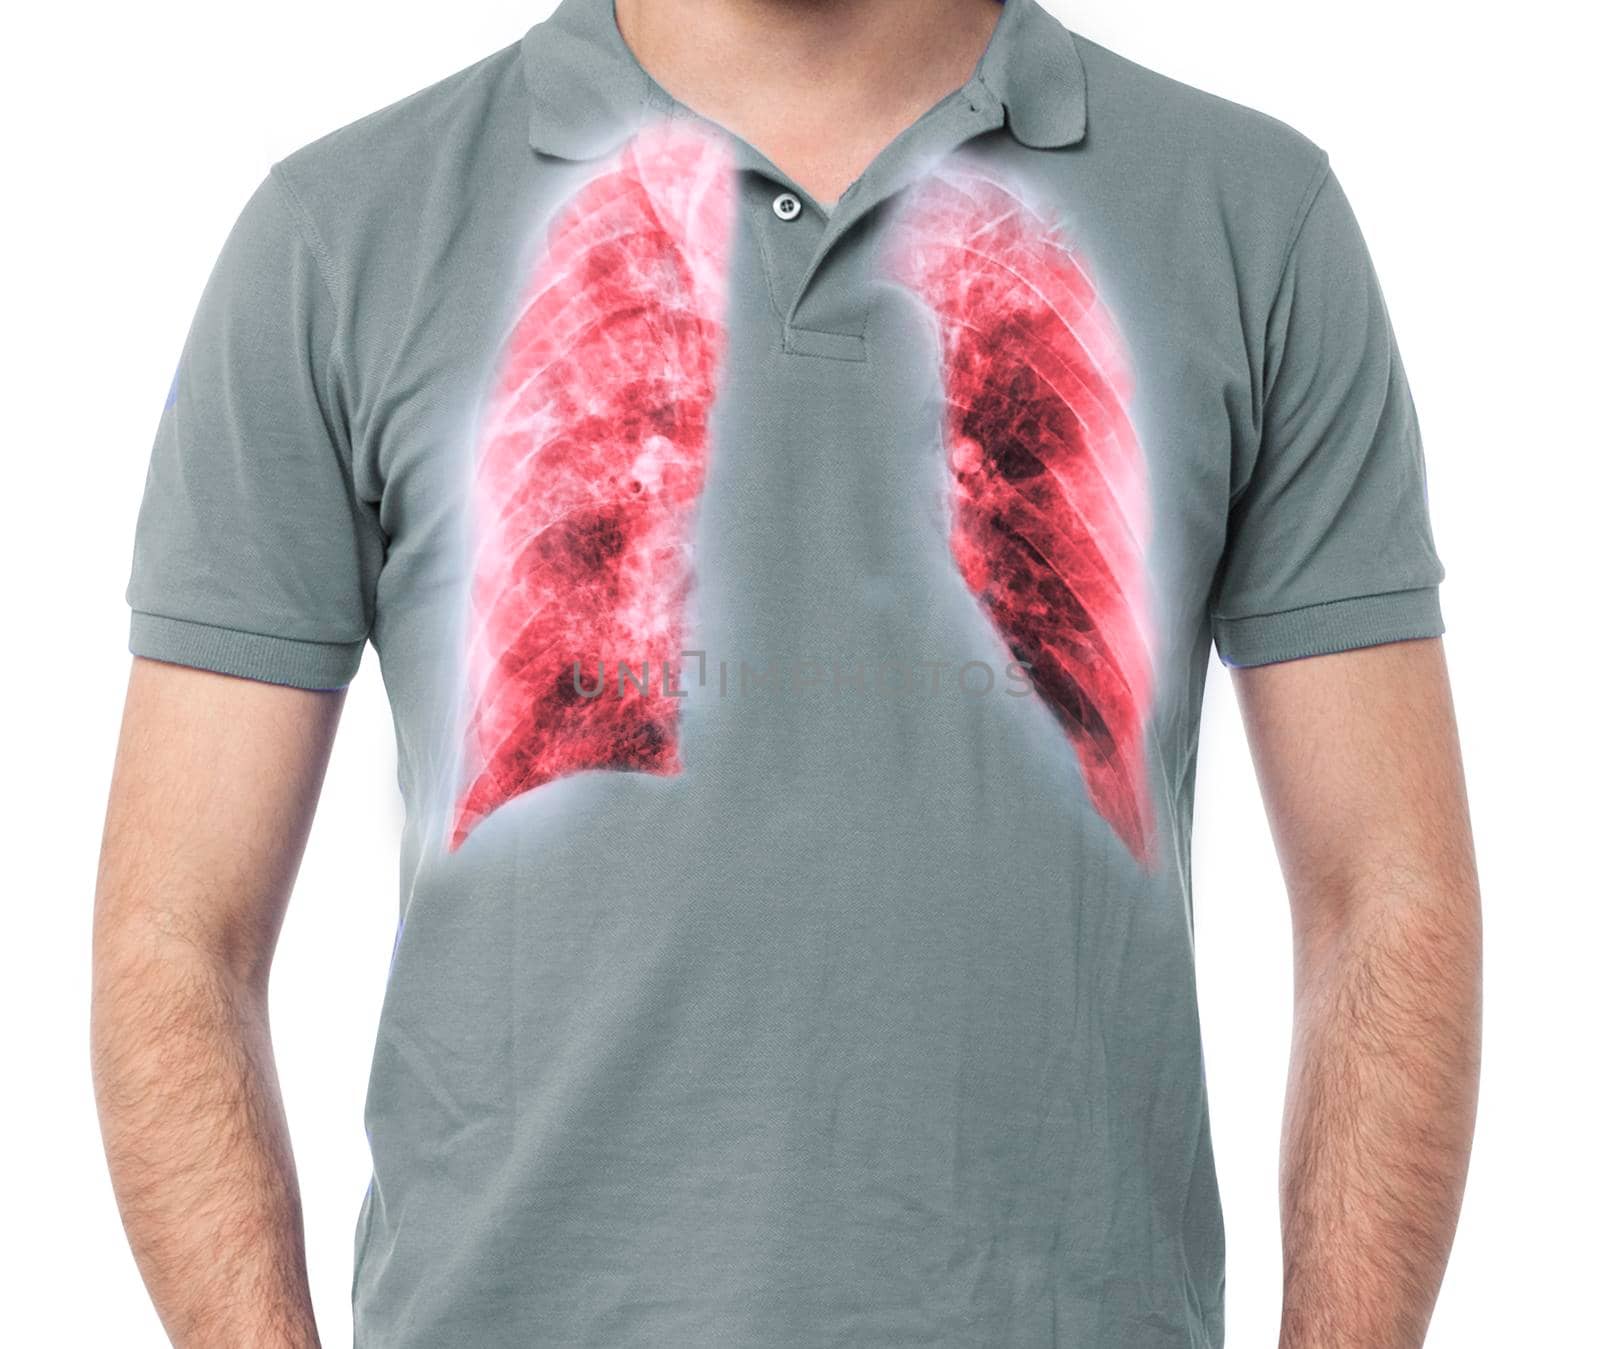 Chest X-ray or X-Ray Image Of Human Chest or Lung ( red zone ) inside thorax showing tuberculosis
Tuberculosis (TB) and corona virus 2019.